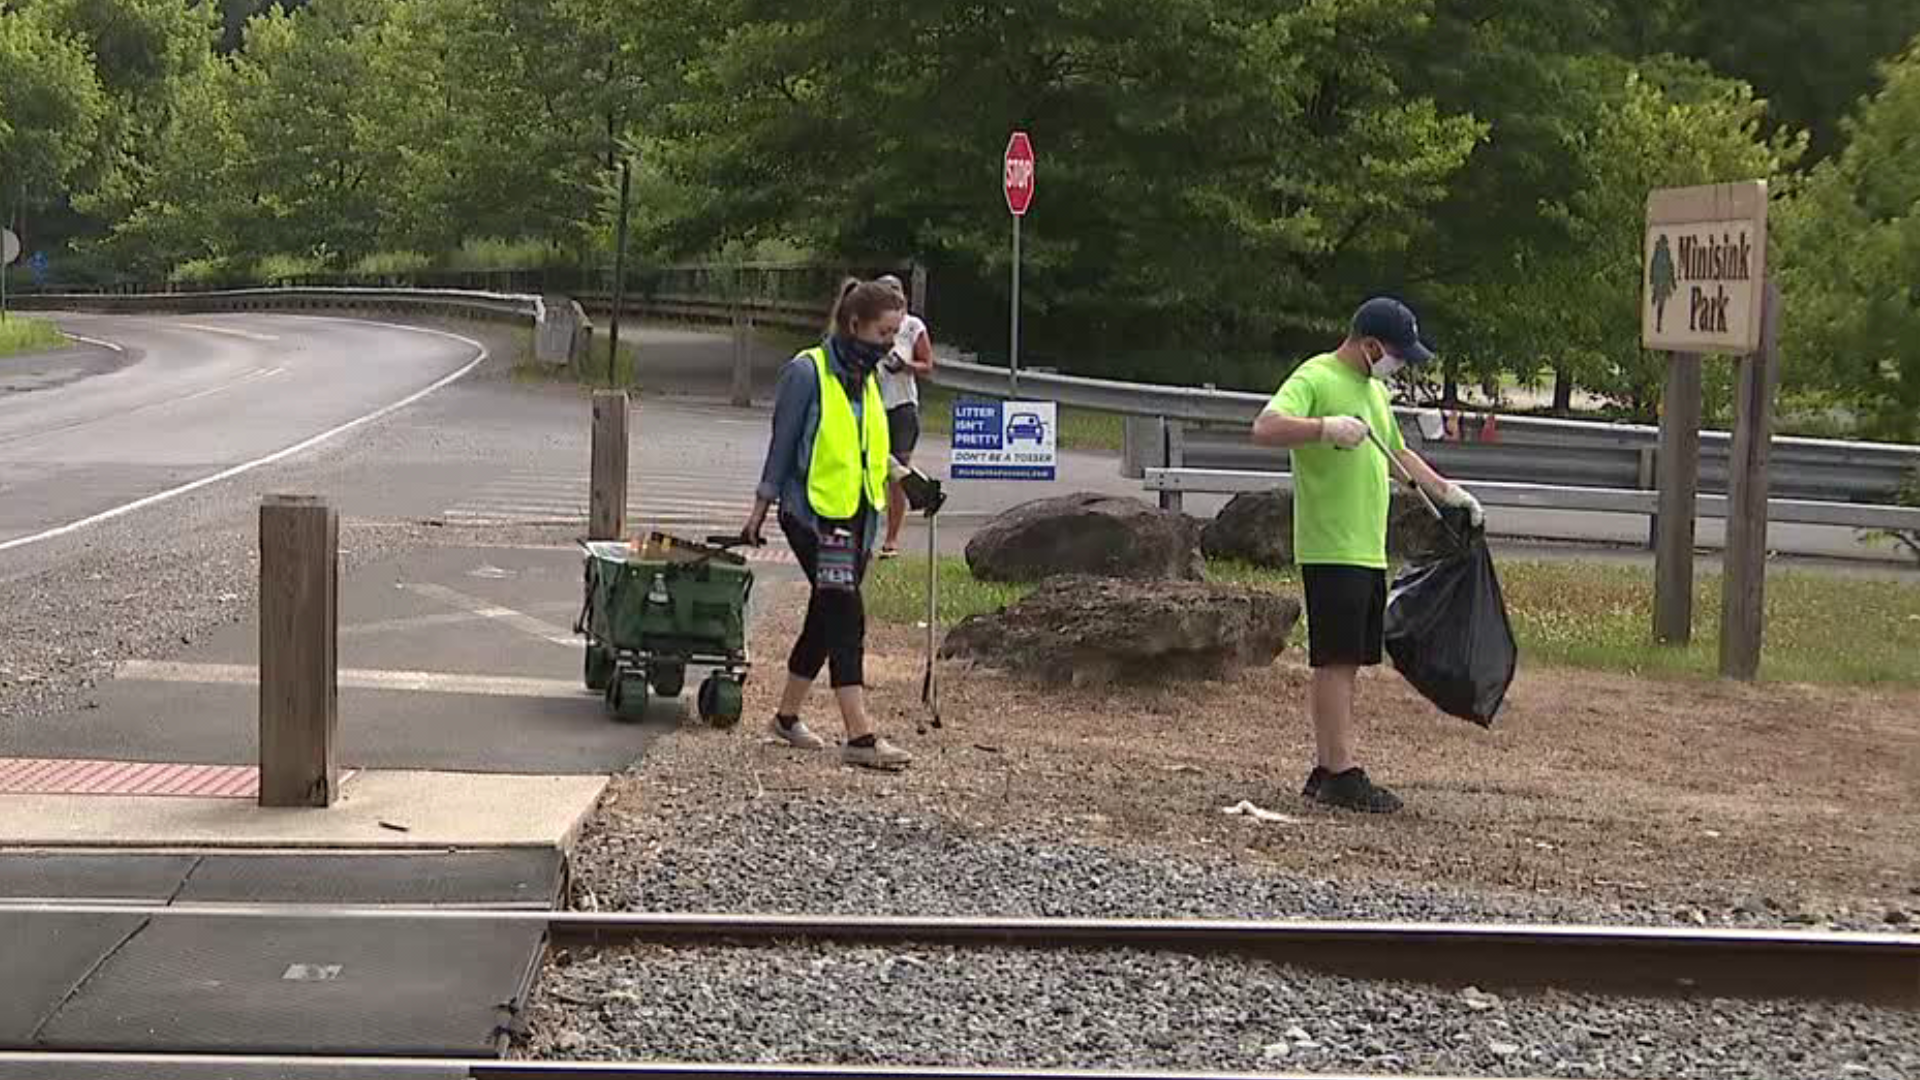 On Wednesday, communities in Monroe County got a helping hand picking up trash left behind by visitors.